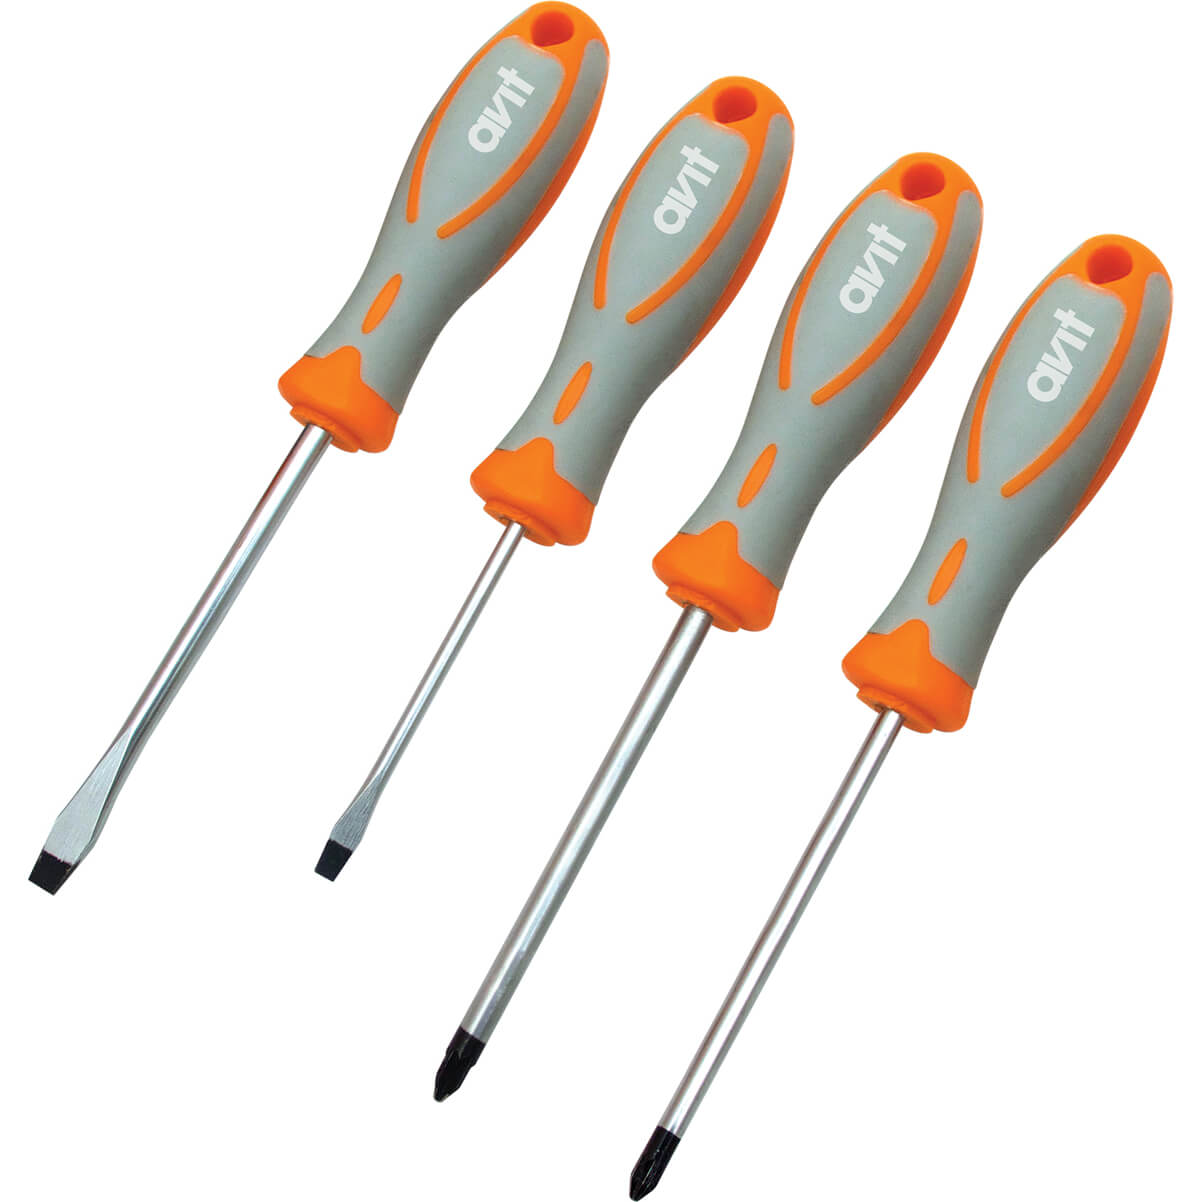 Image of Avit 4 Piece Pozi and Slotted Screwdriver Set